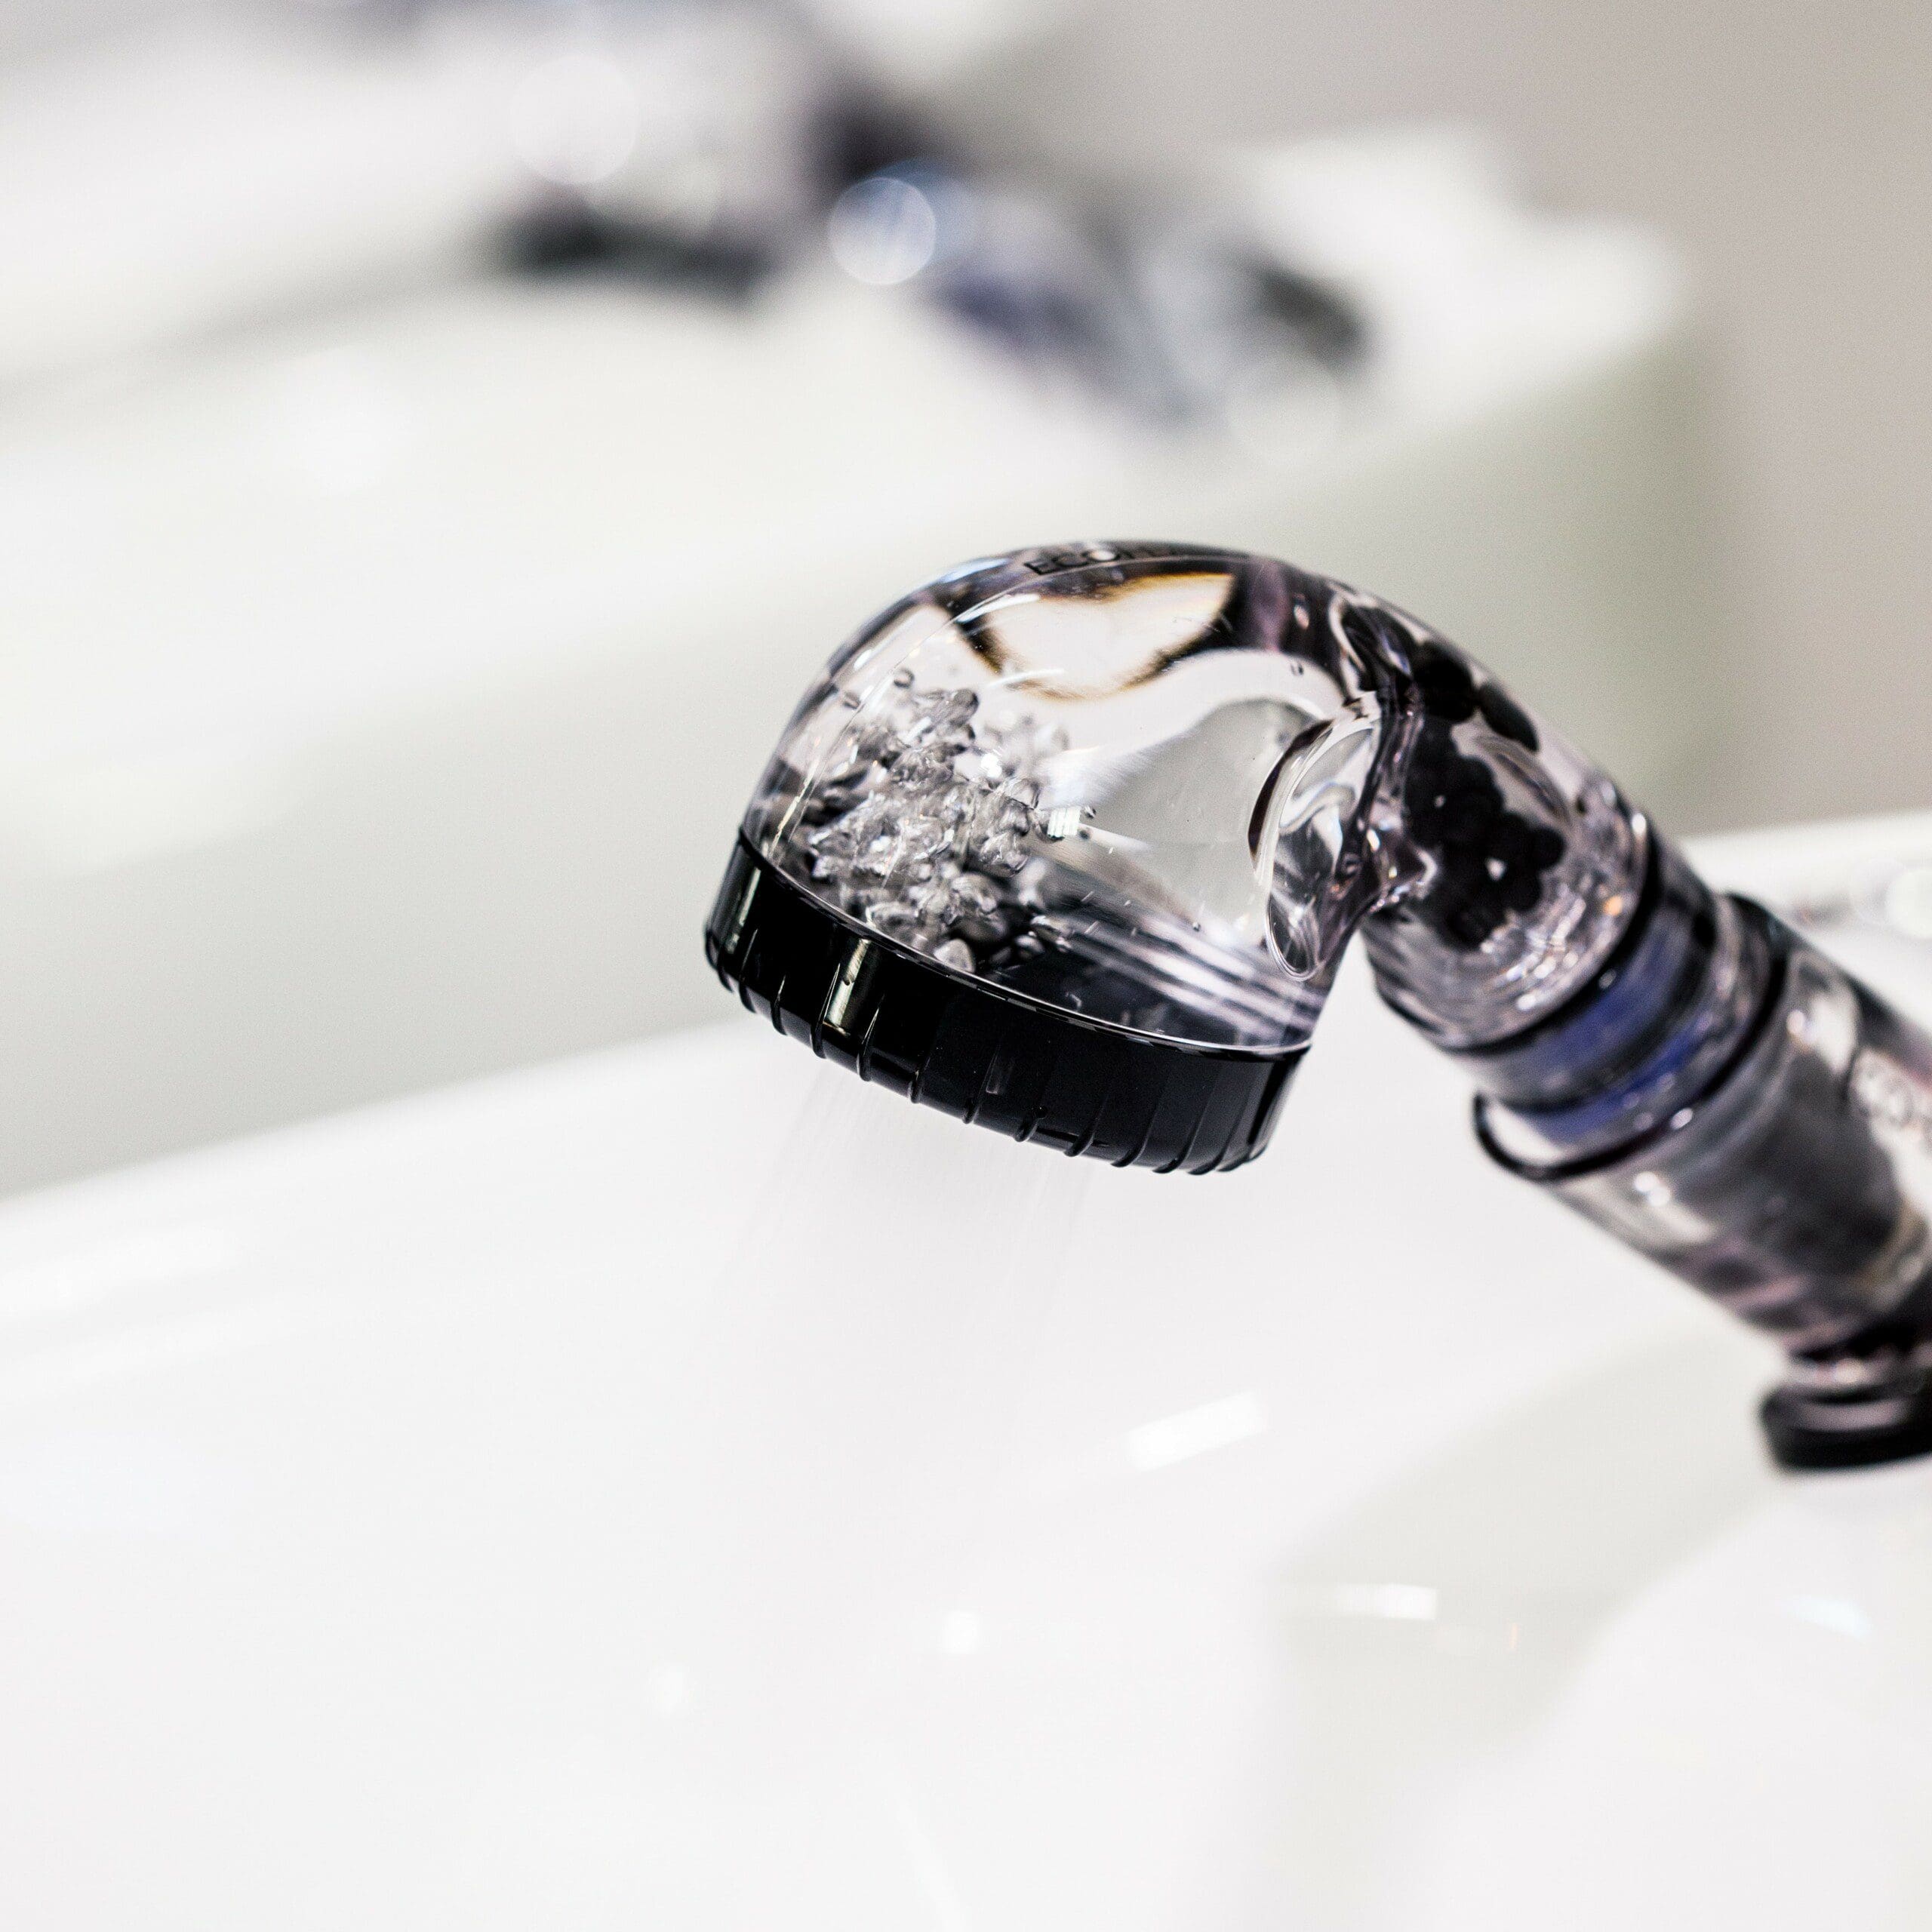 Ecoheads Shower Head: A Game-Changer for Sustainable Salons